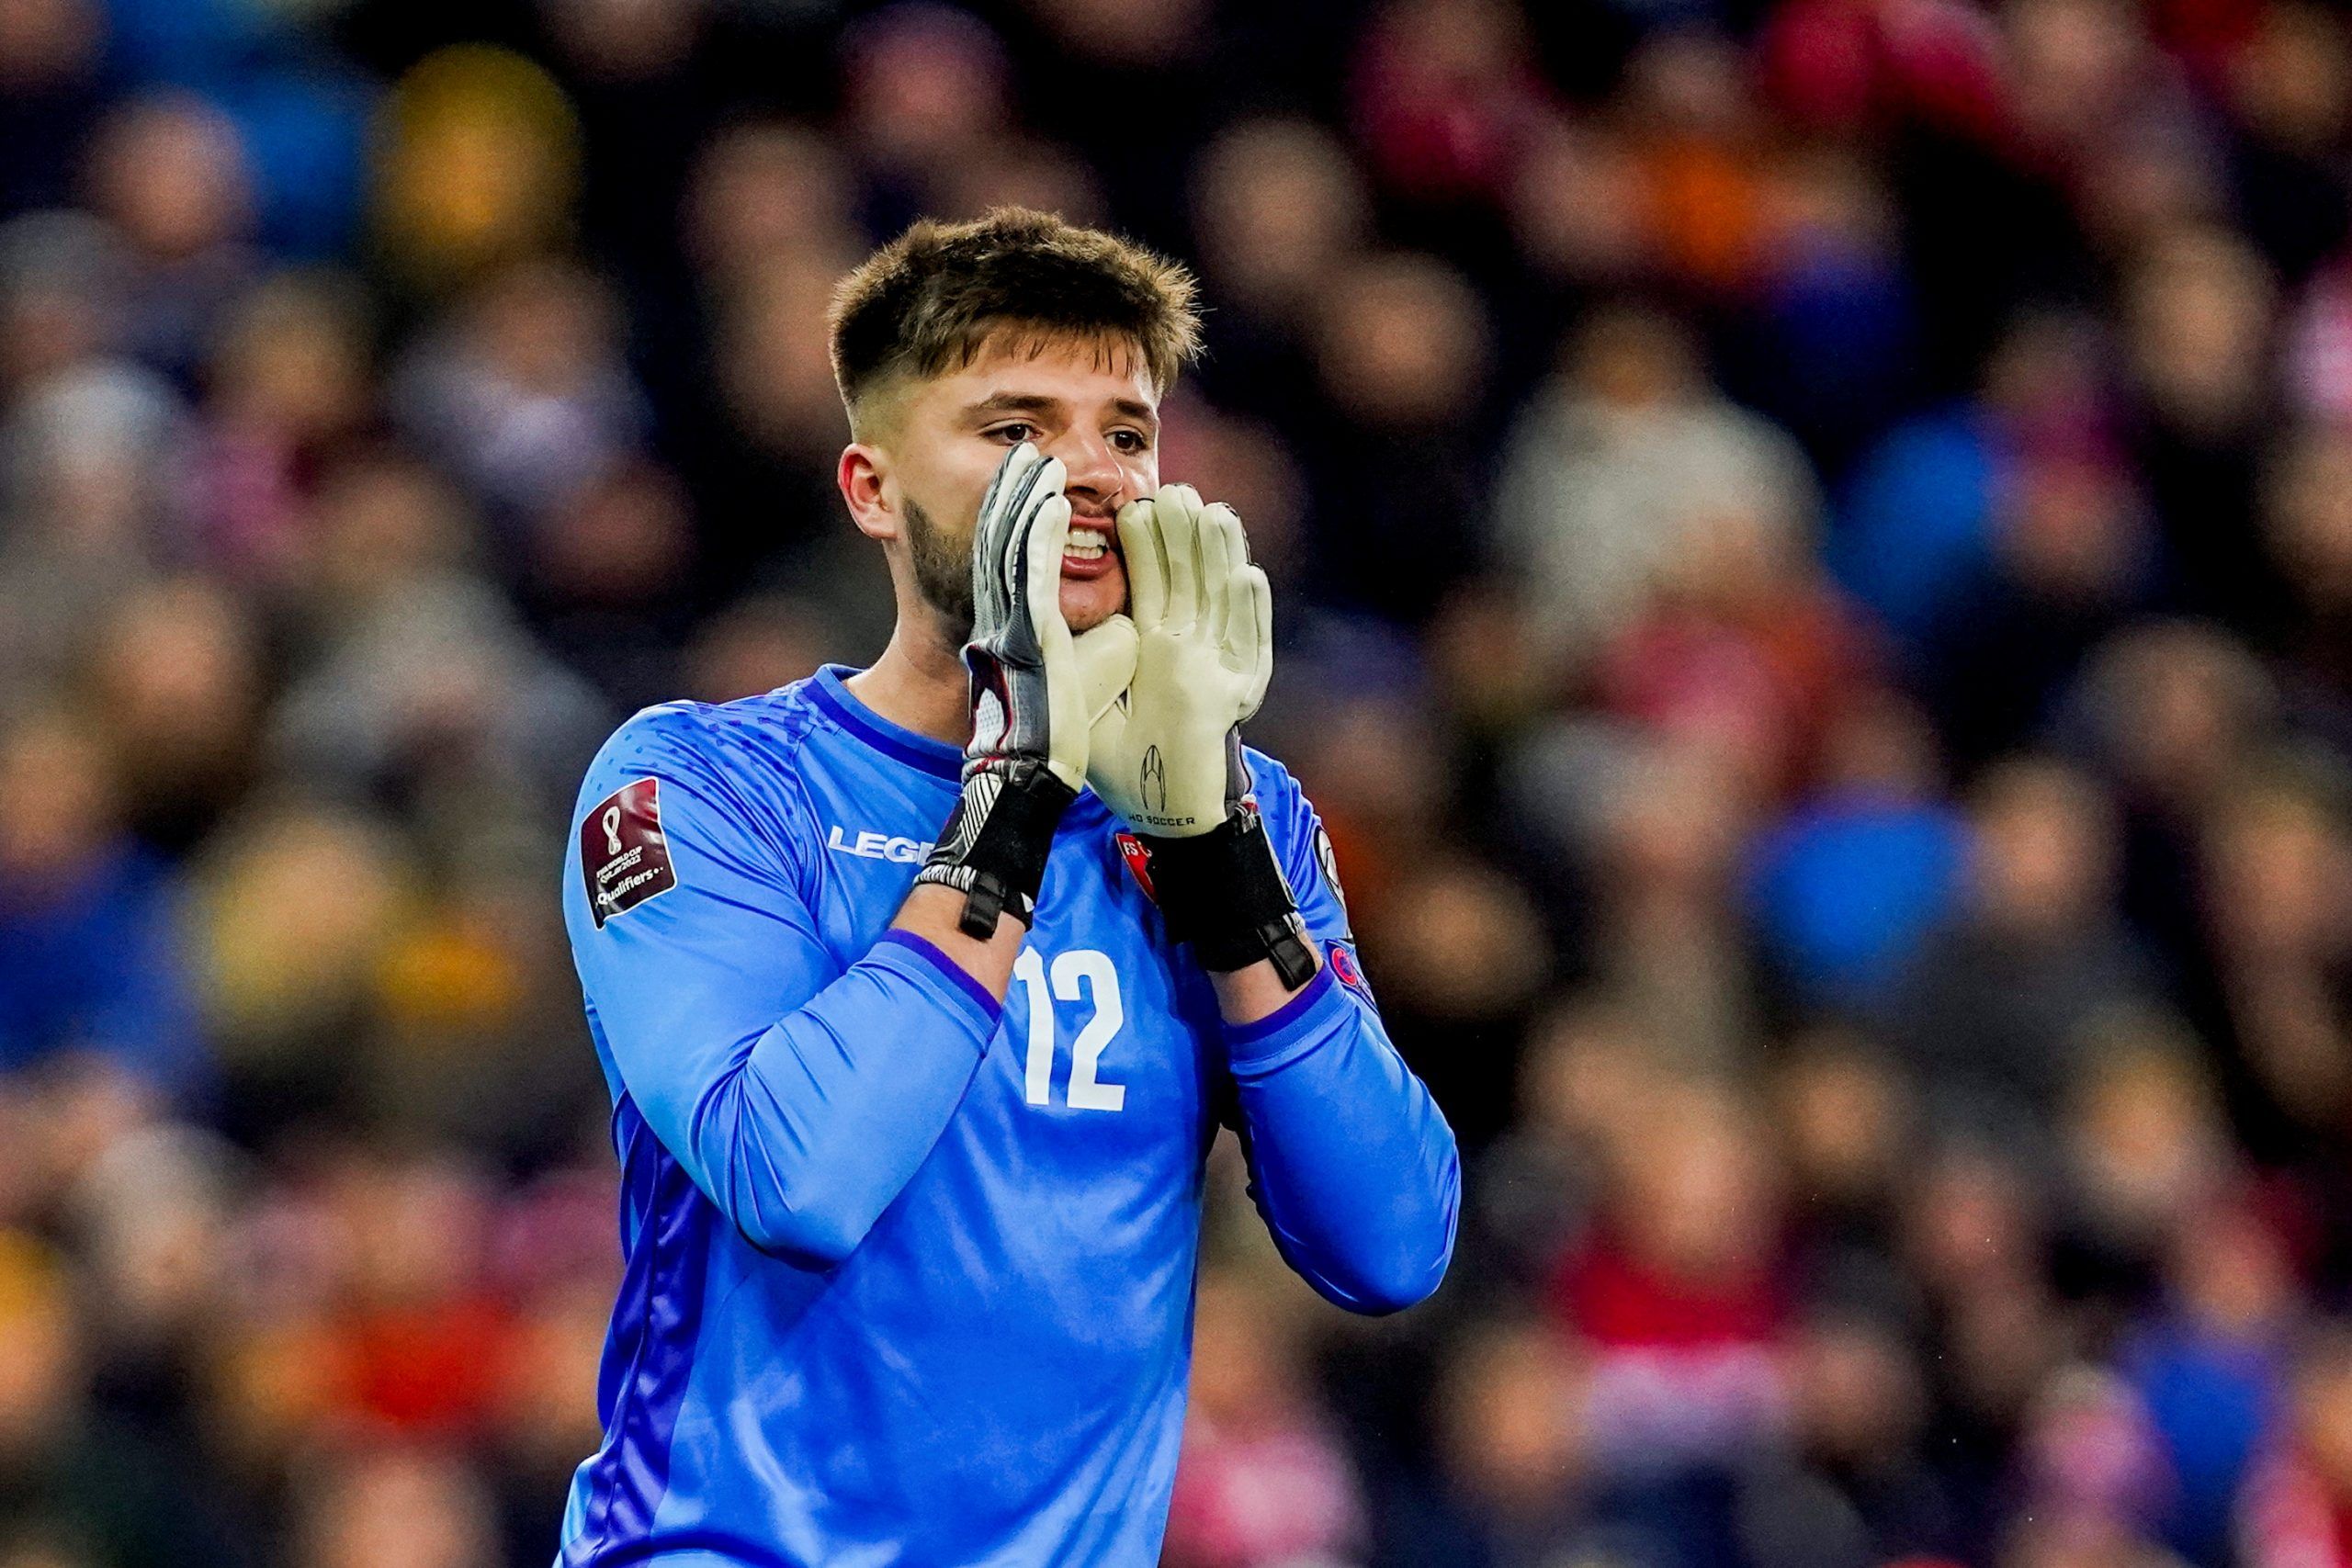 matija-sarkic-birmingham-city-montenegro-premier-league-wolves-wolverhampton-wanderers-bruno-lage-john-ruddySoccer Football - World Cup - UEFA Qualifiers - Group G - Norway v Montenegro - Ullevaal Stadion, Oslo, Norway - October 11, 2021 Montenegro's Matija Sarkic reacts Hakon Mosvold Larsen/NTB via REUTERS    ATTENTION EDITORS - THIS IMAGE WAS PROVIDED BY A THIRD PARTY. NORWAY OUT. NO COMMERCIAL OR EDITORIAL SALES IN NORWAY.